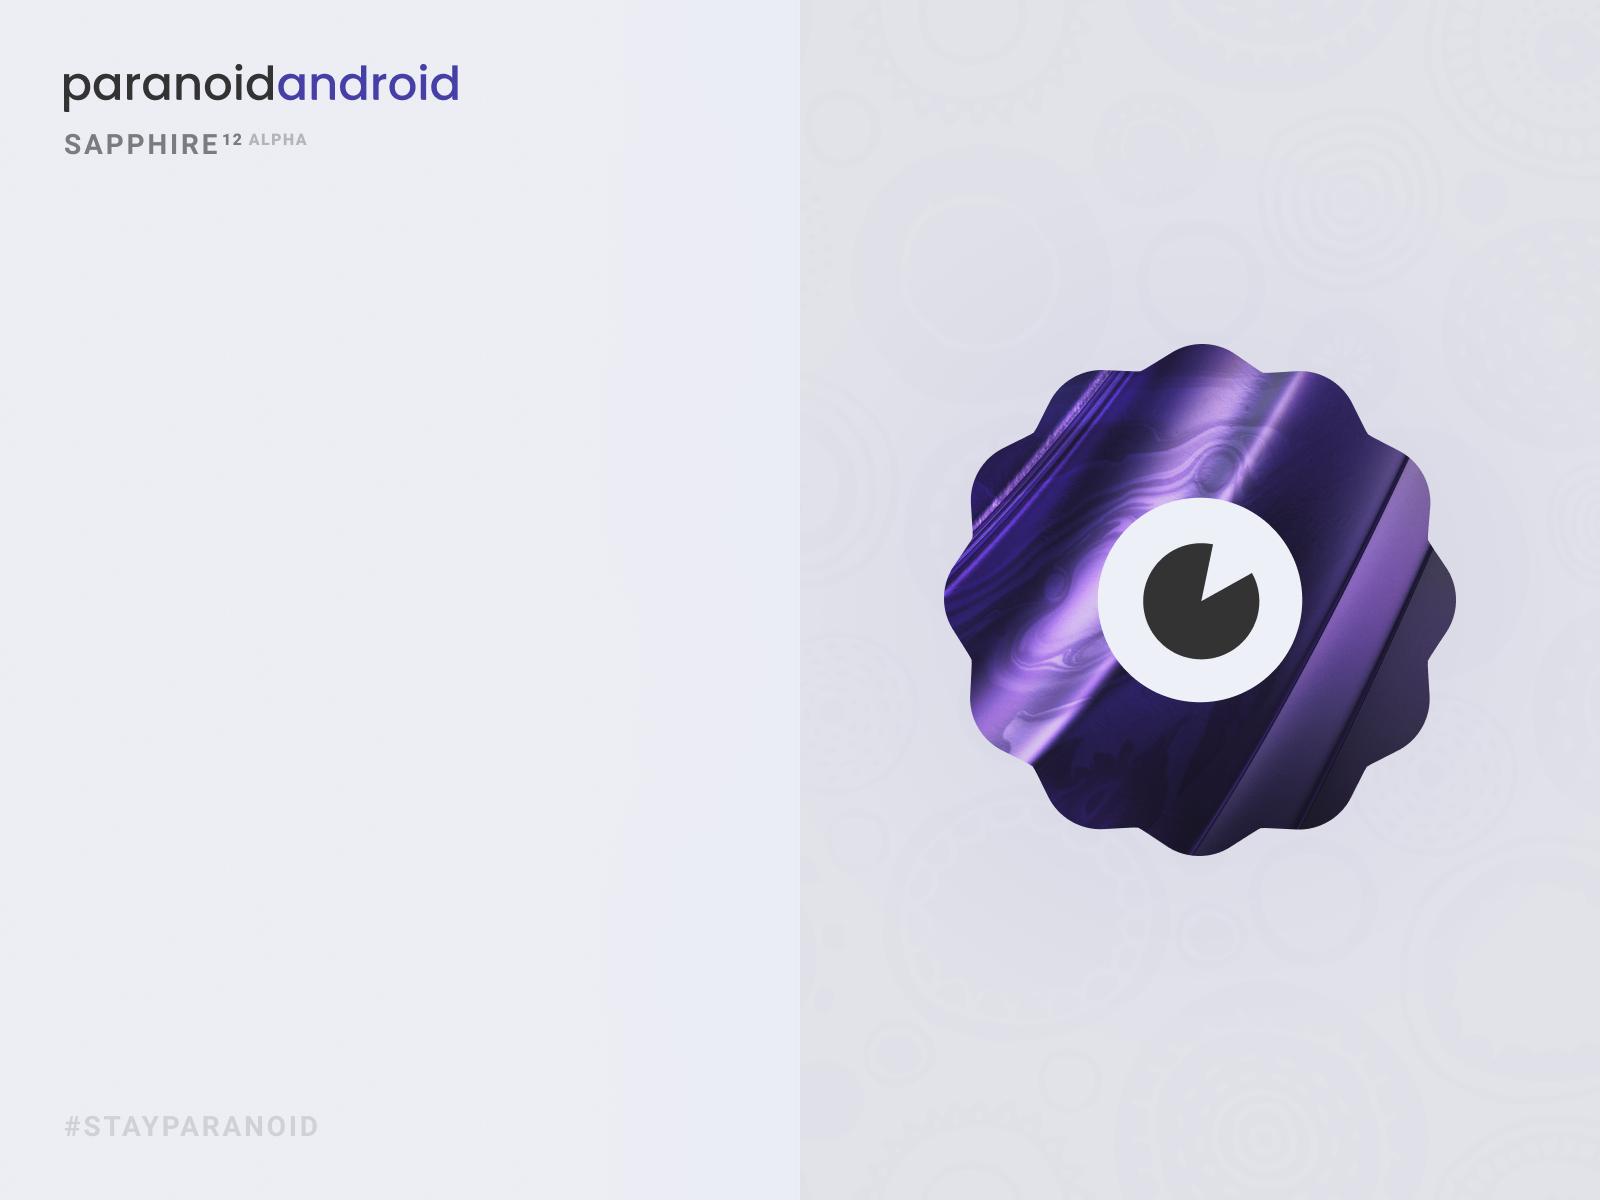 Paranoid Android Sapphire Alpha 2